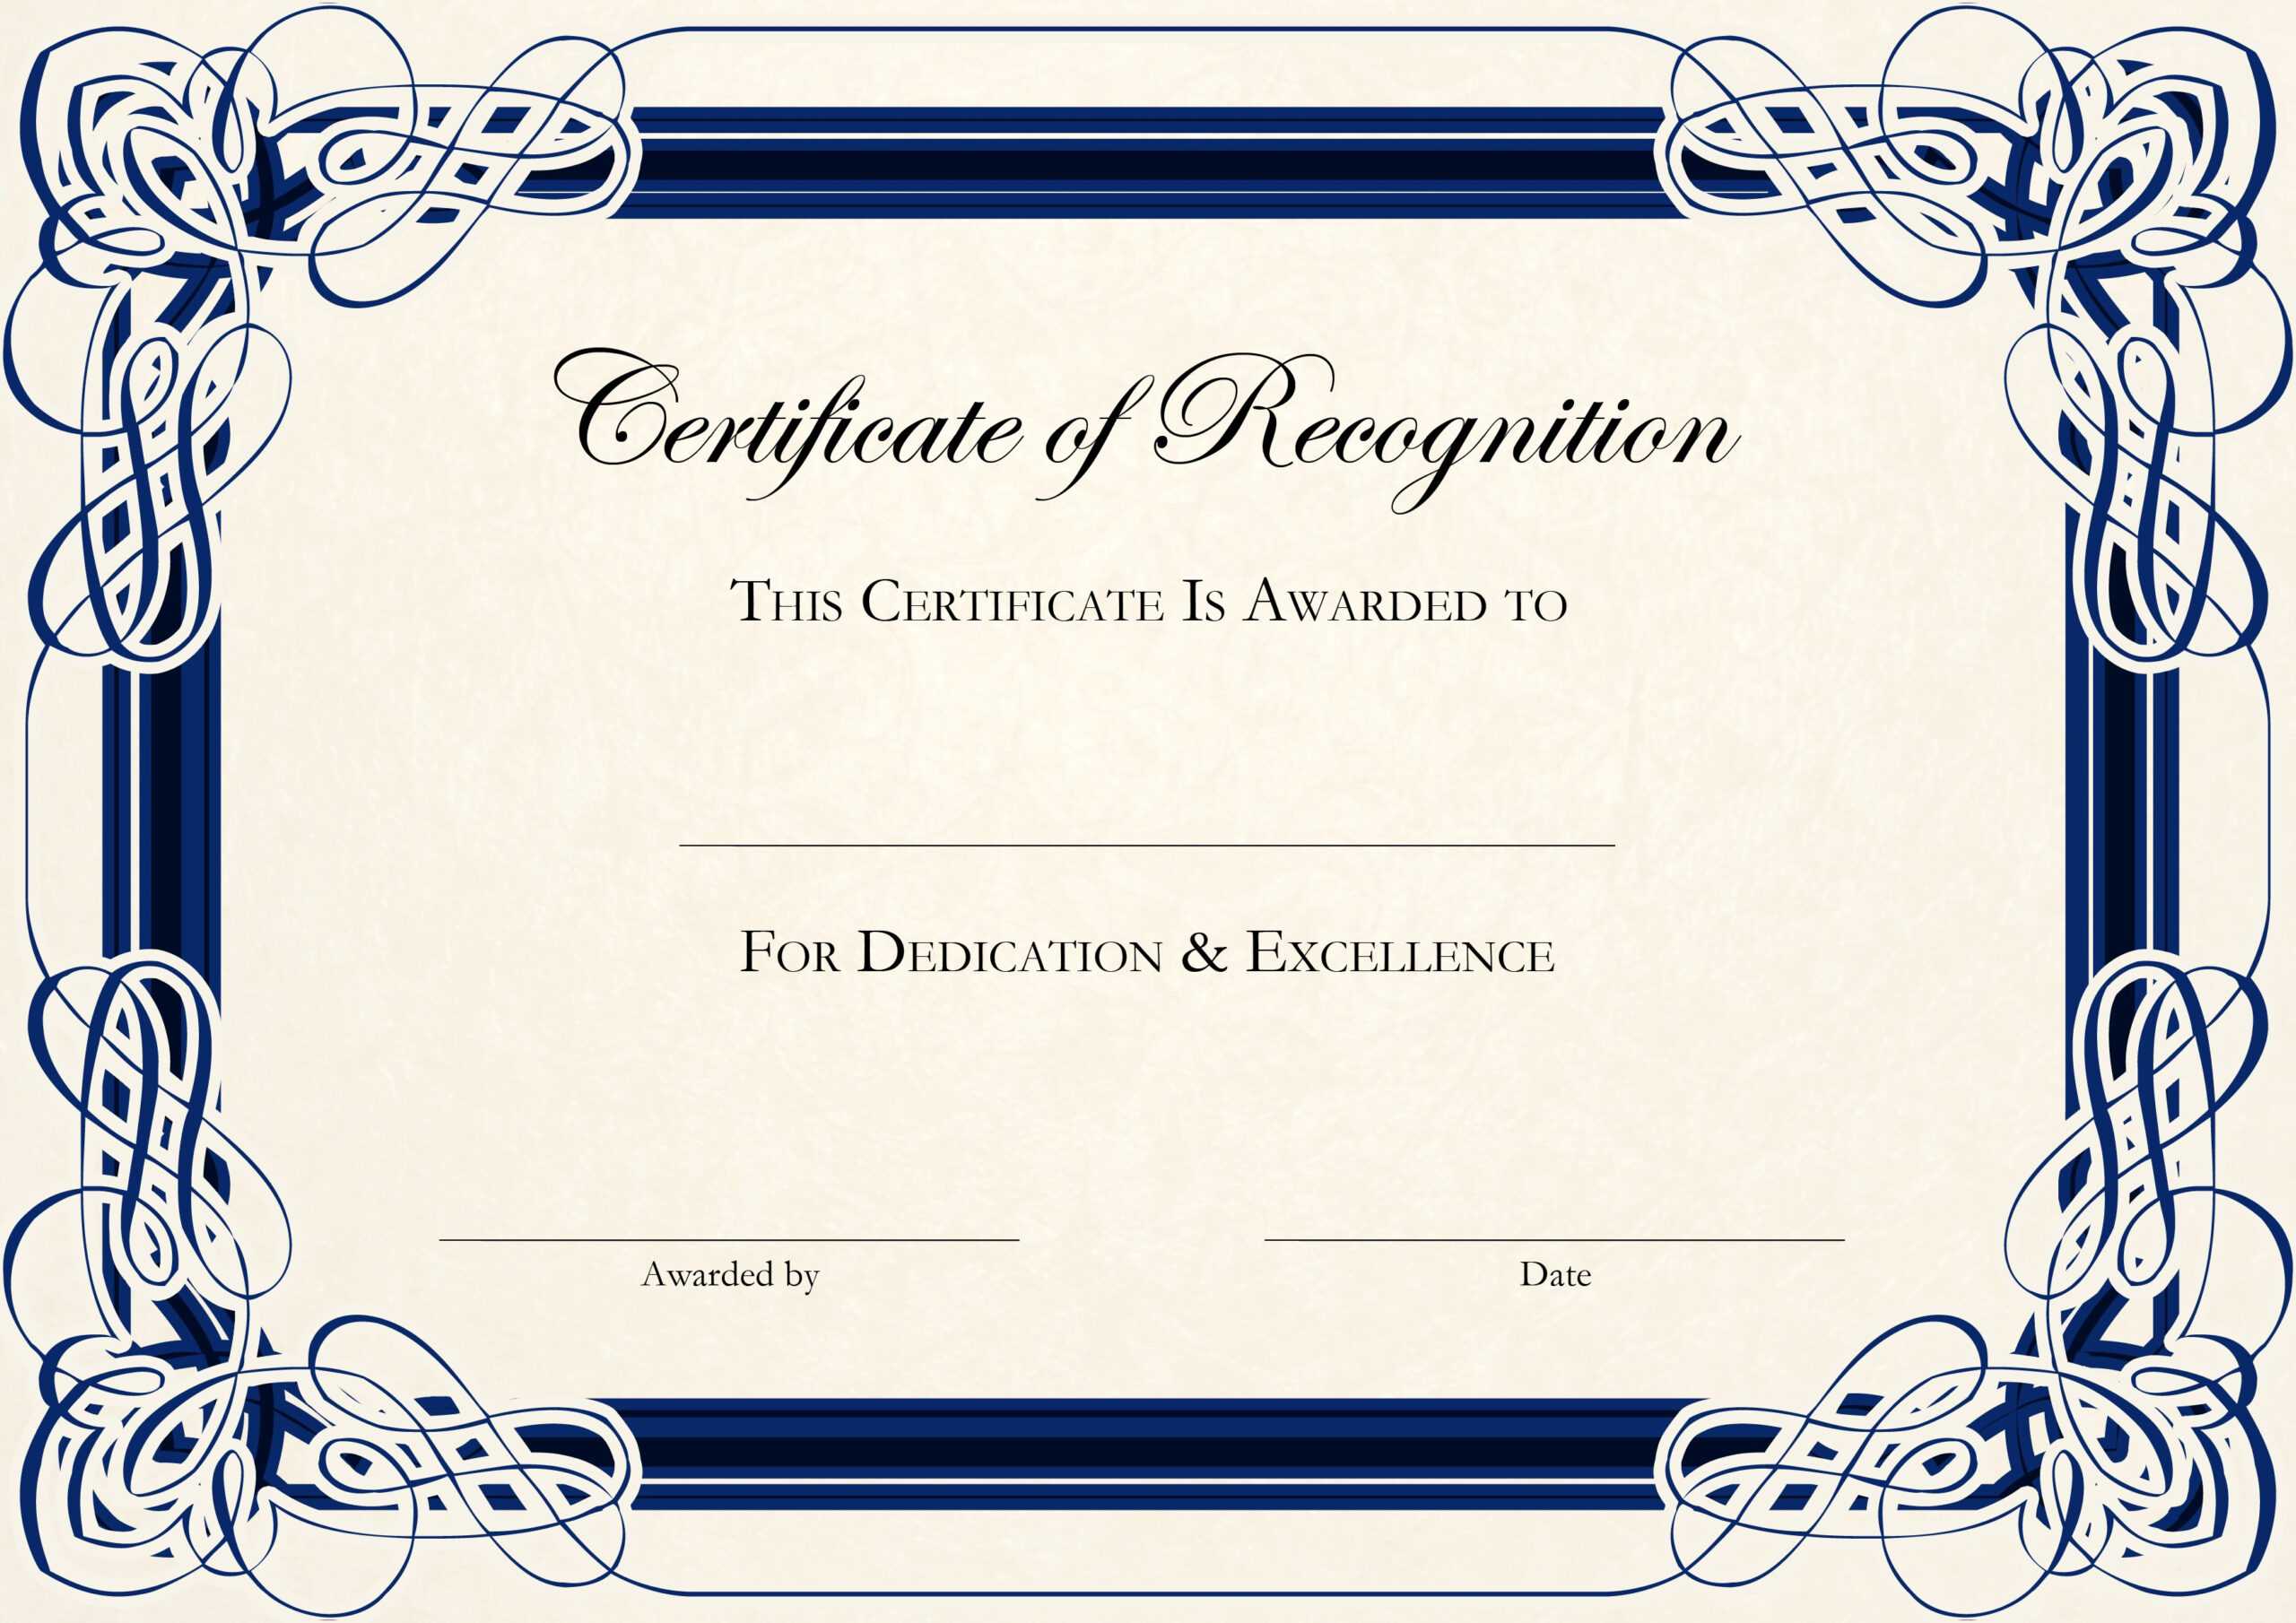 Free Certificate Templates For Word Clipart Images Gallery Intended For Certificate Templates For Word Free Downloads